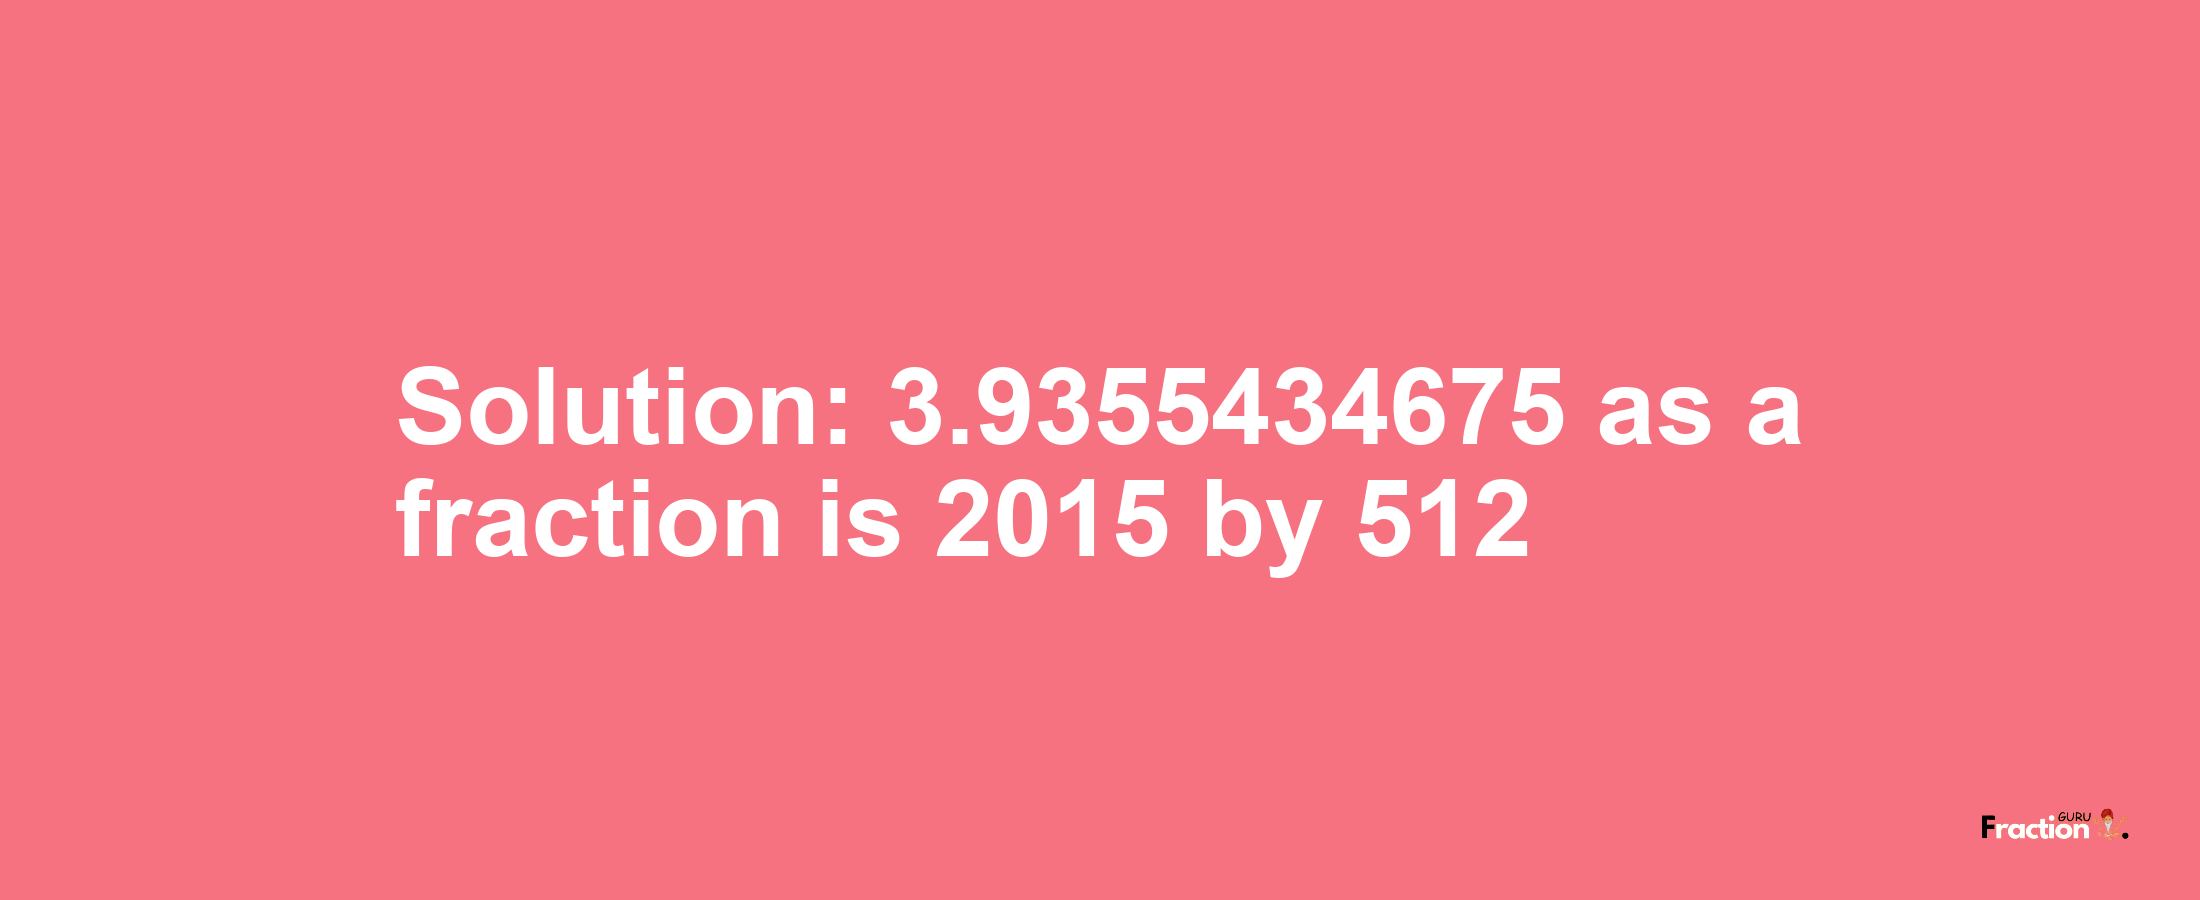 Solution:3.9355434675 as a fraction is 2015/512